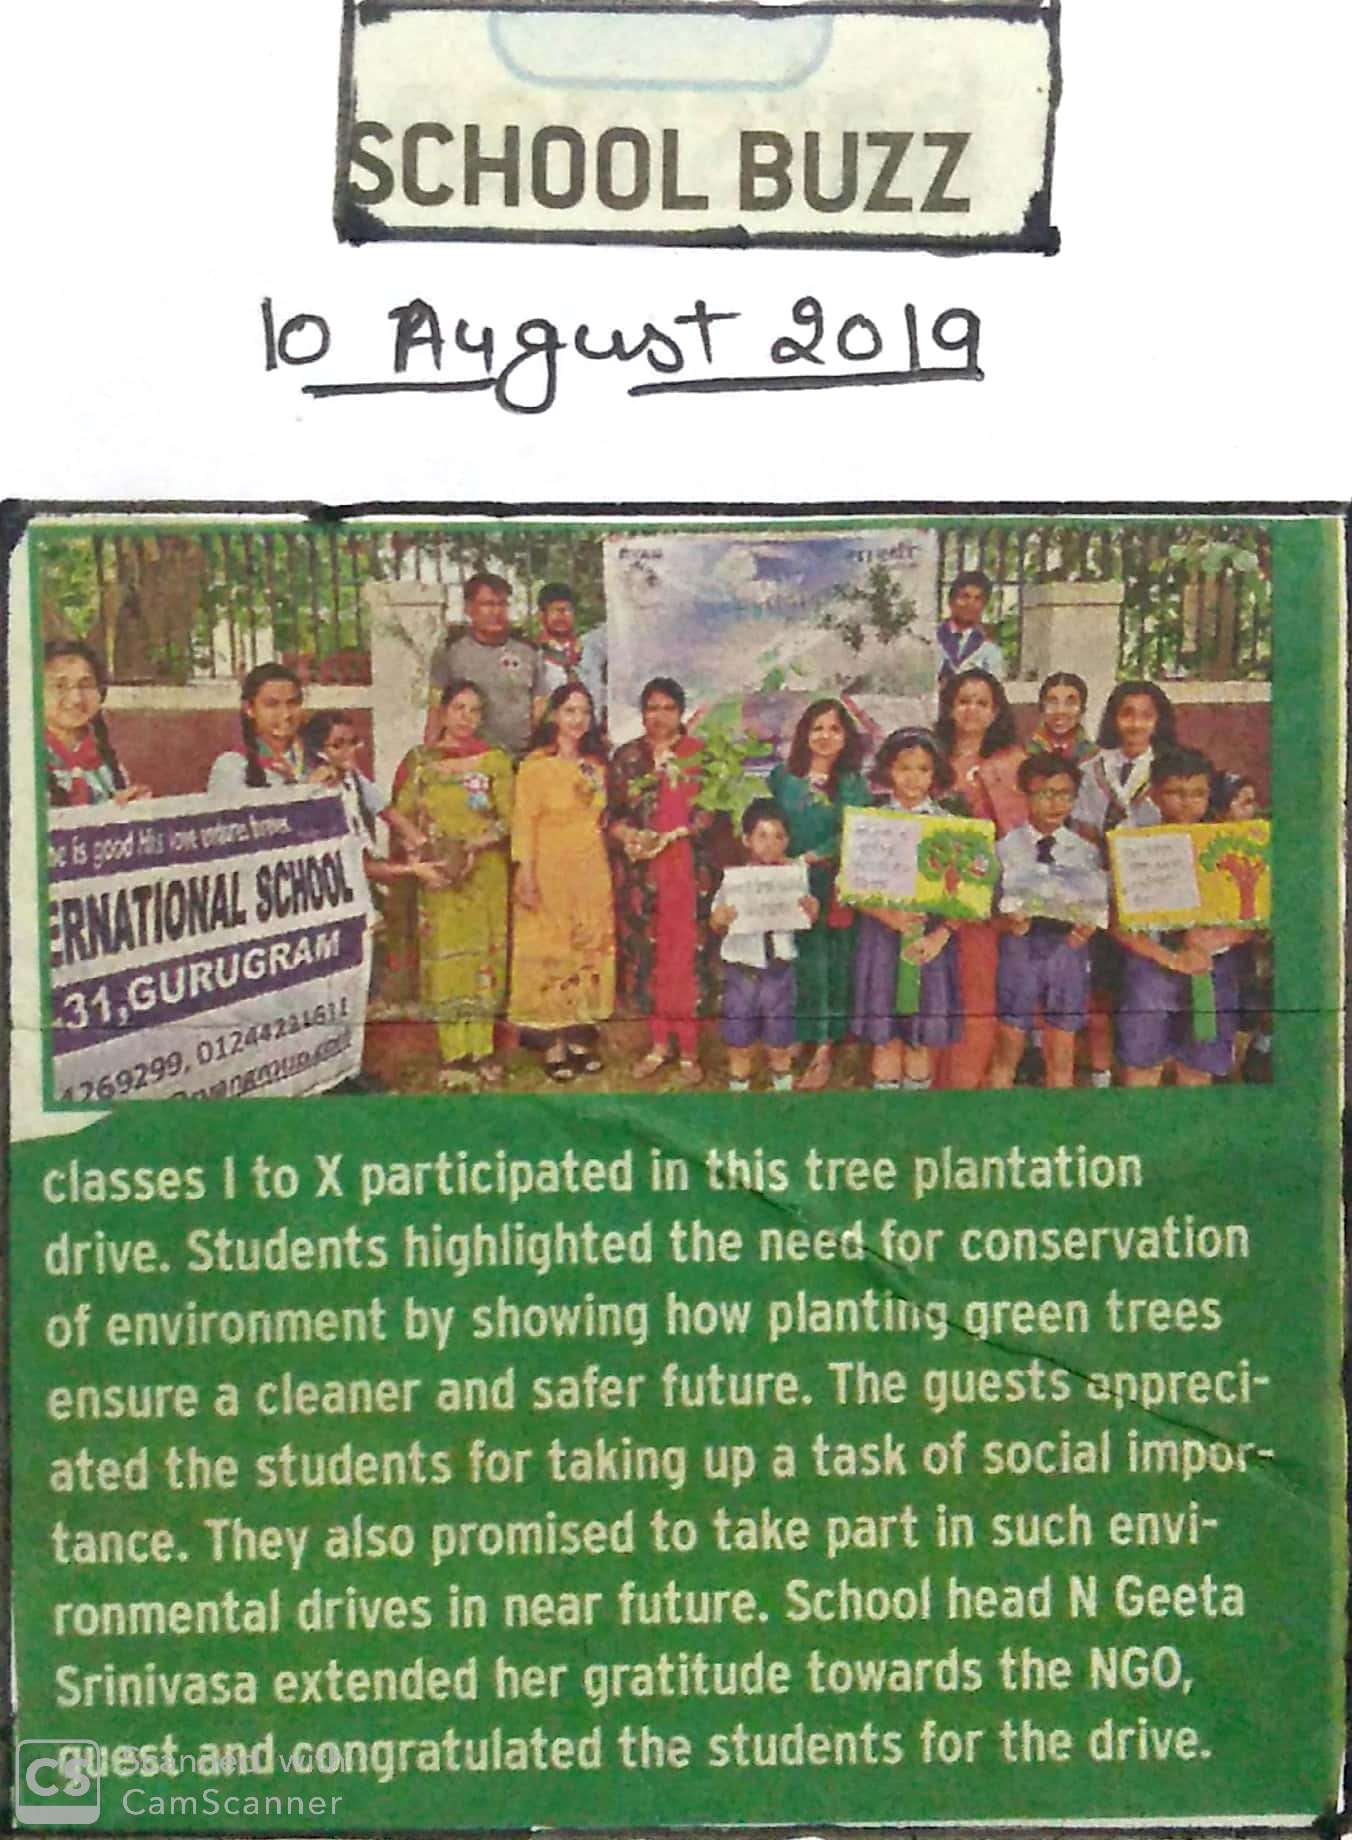 Students from class Ist - Xth participate in a tree plantation drive - Ryan International School, Sec 31 Gurgaon